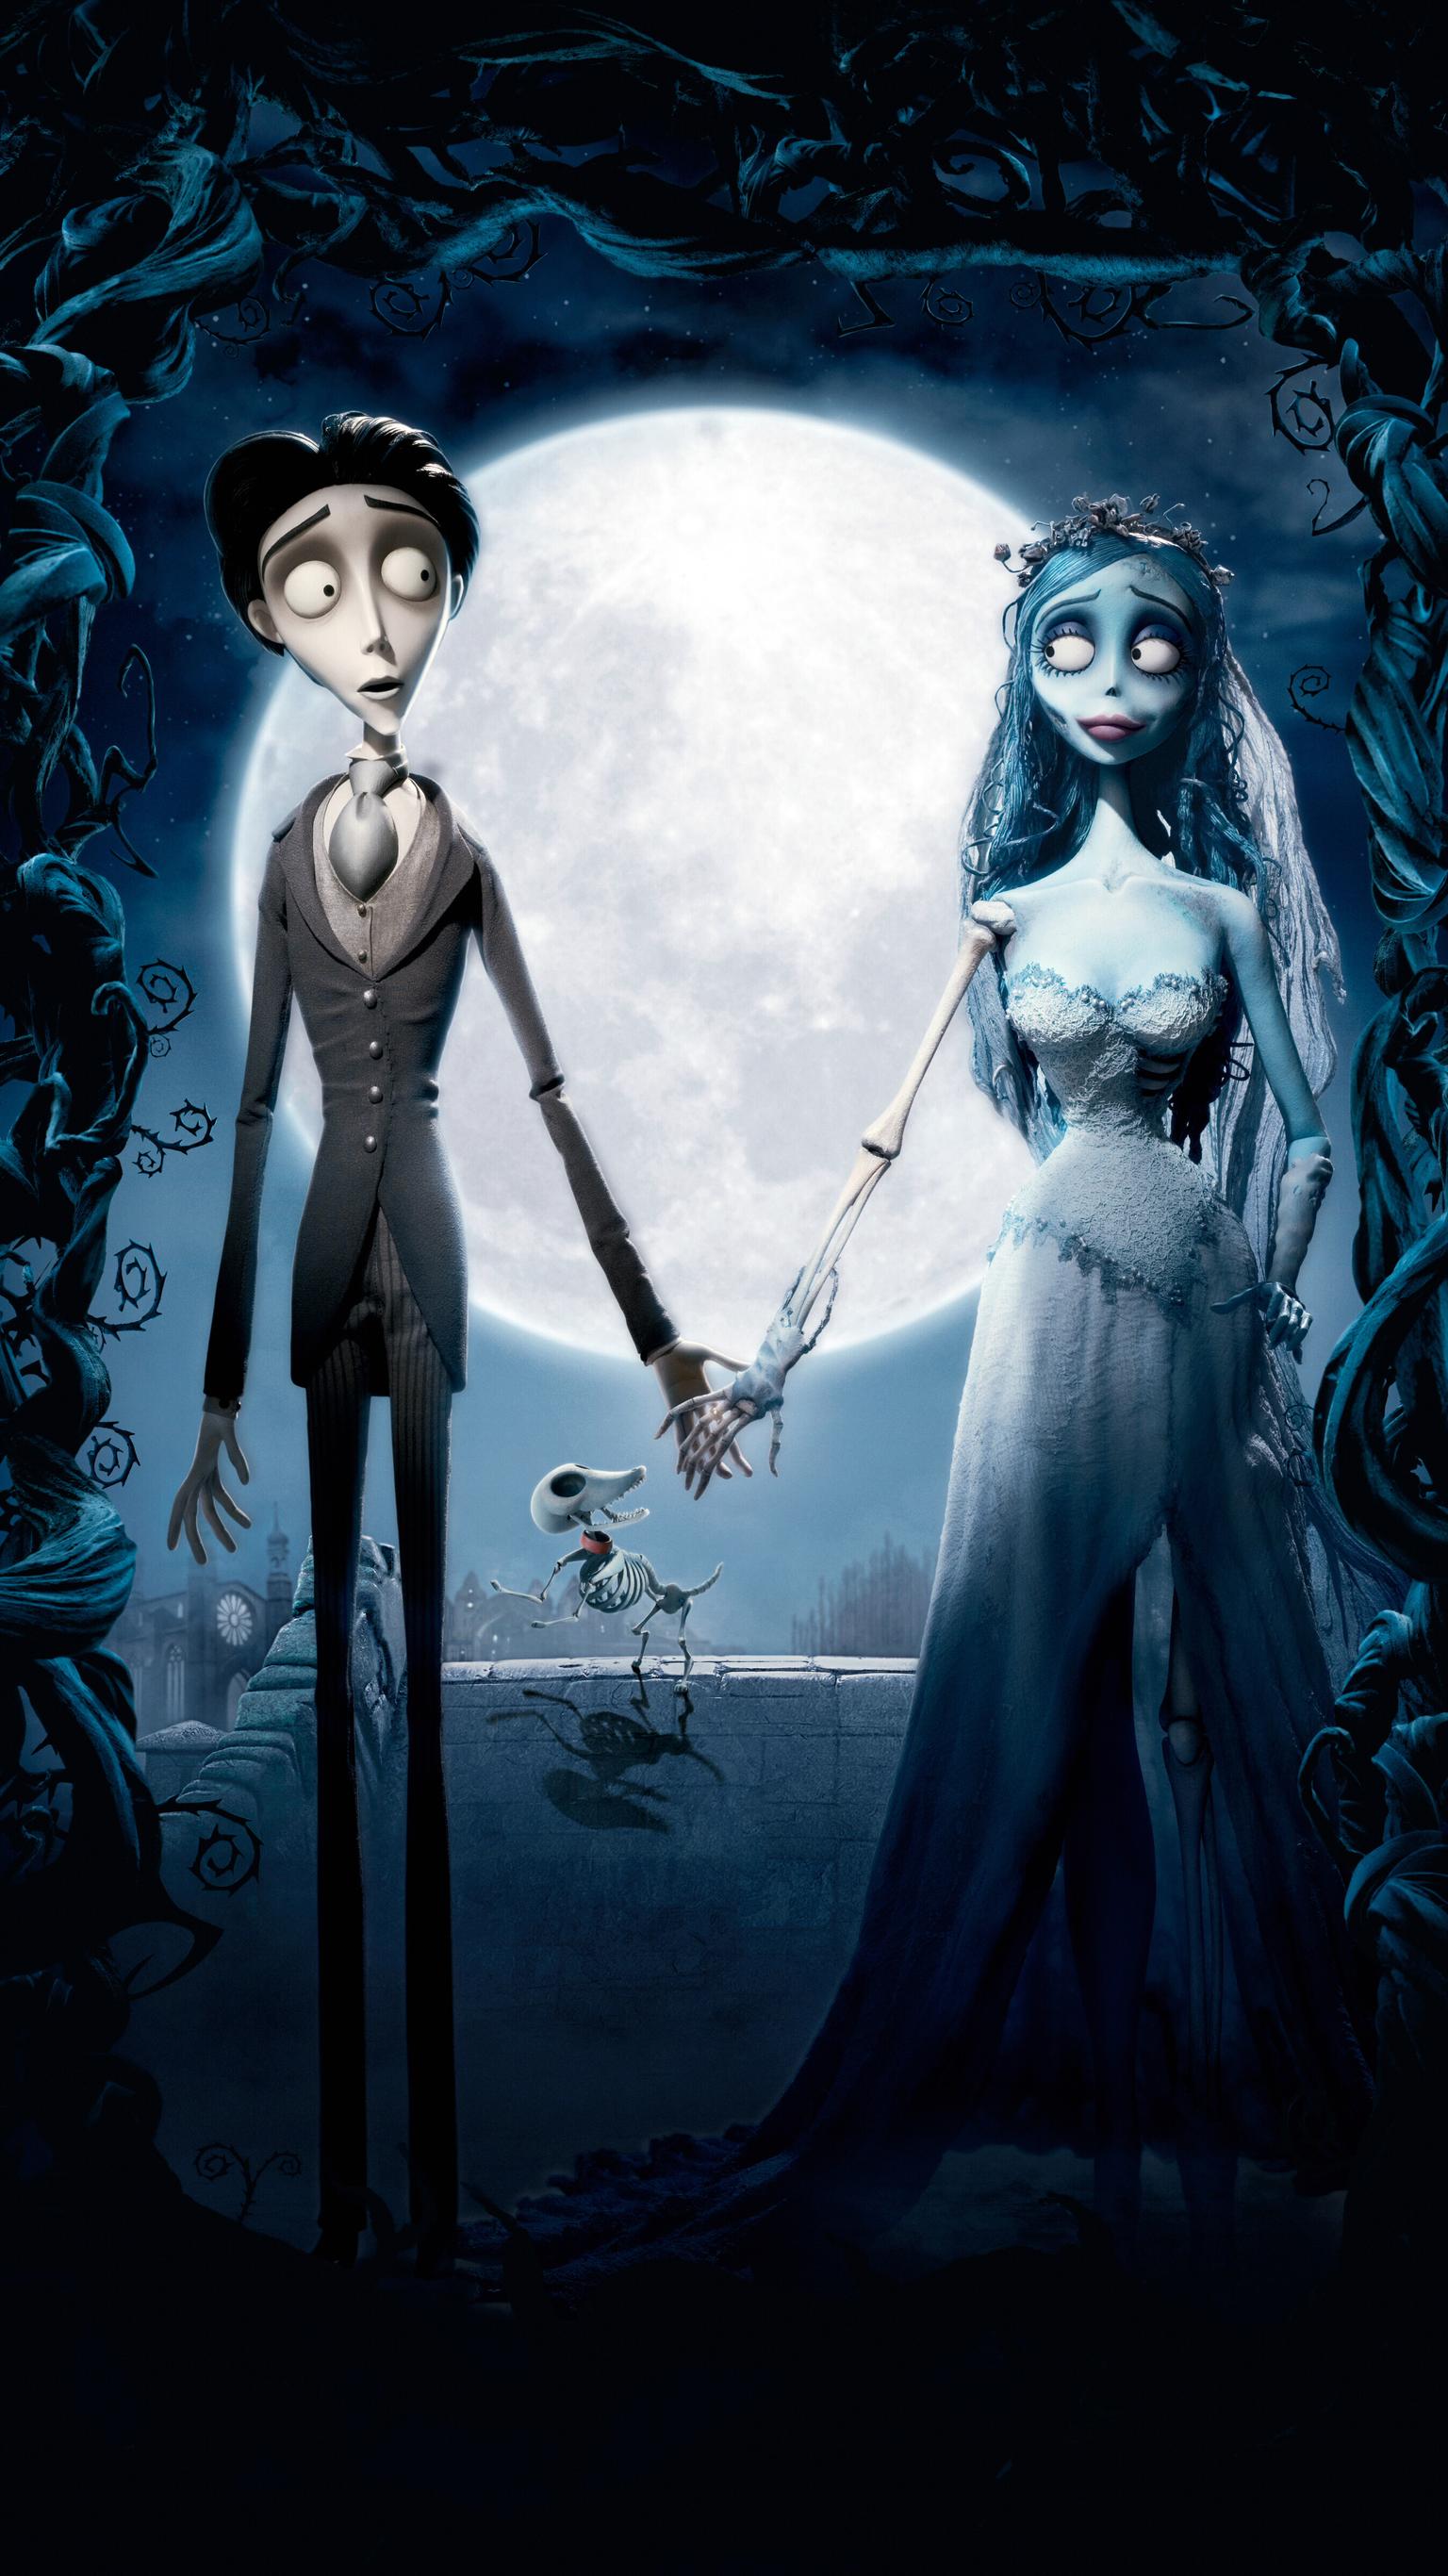 corpse bride wallpapers wallpaper cave on corpse bride wallpaper hd